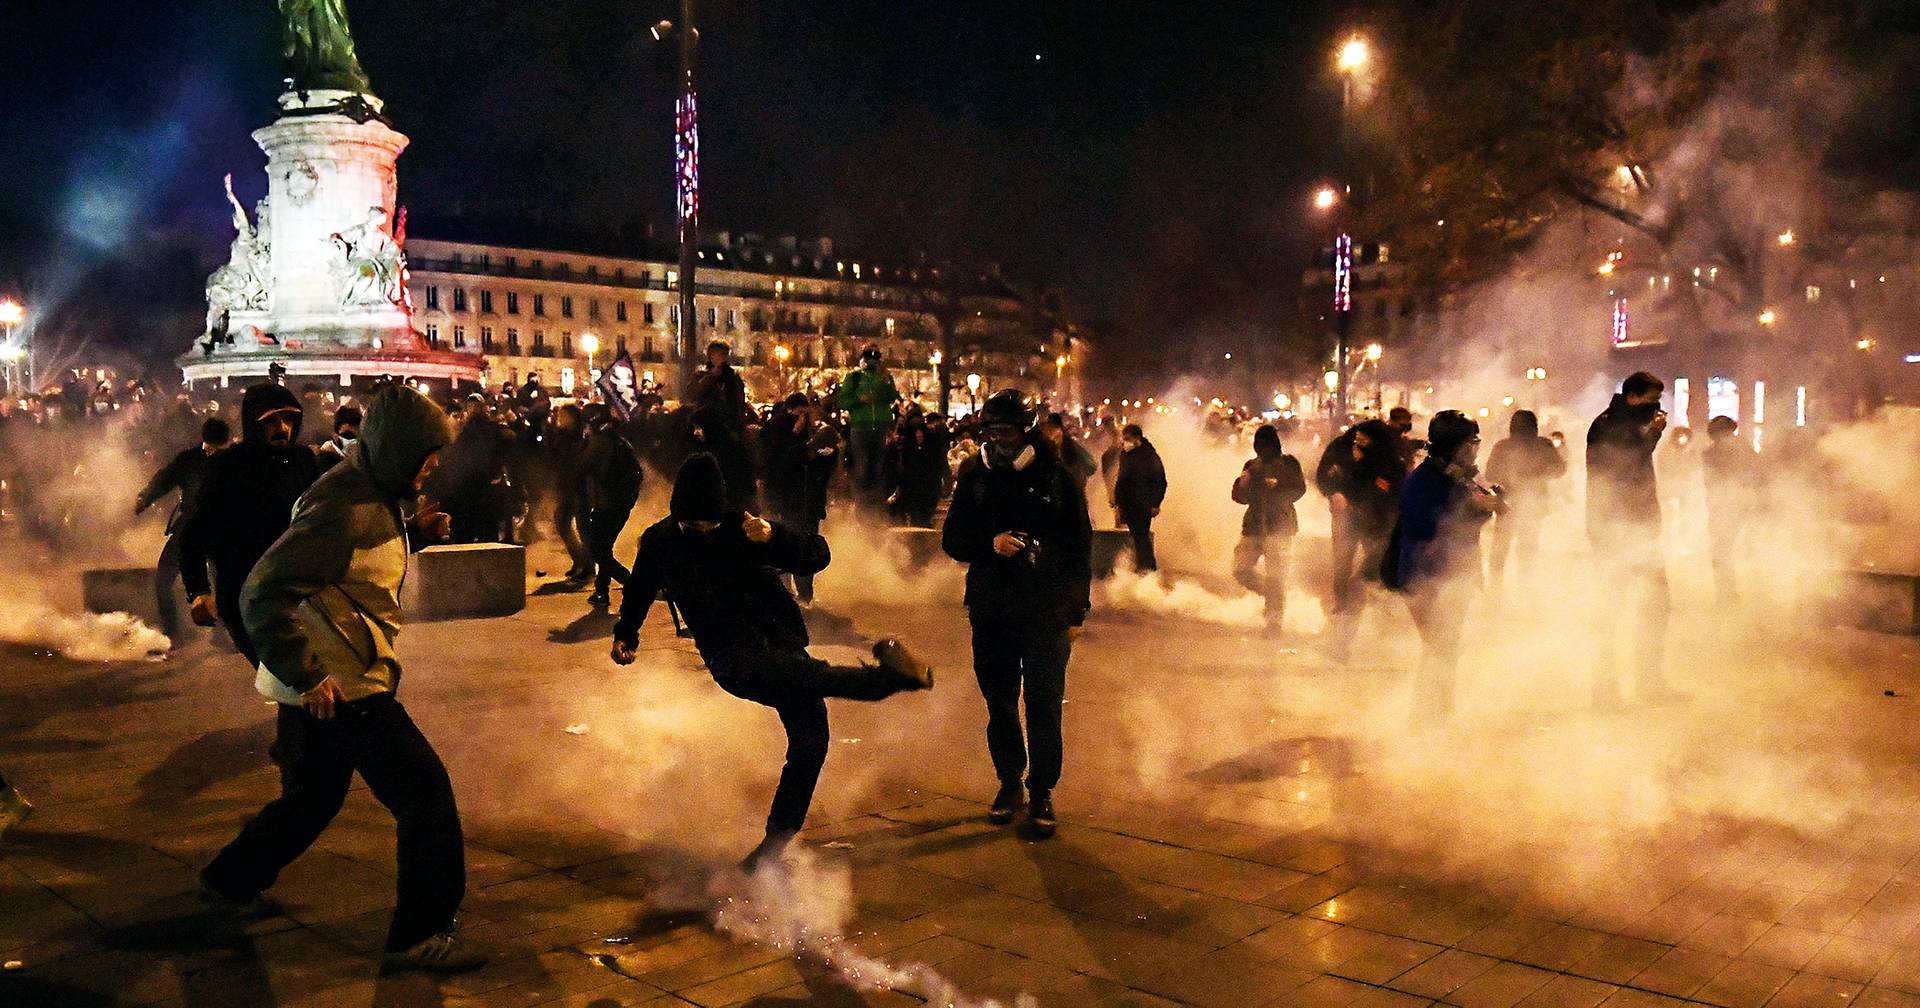 violence rises in the streets of France as the political center collapses